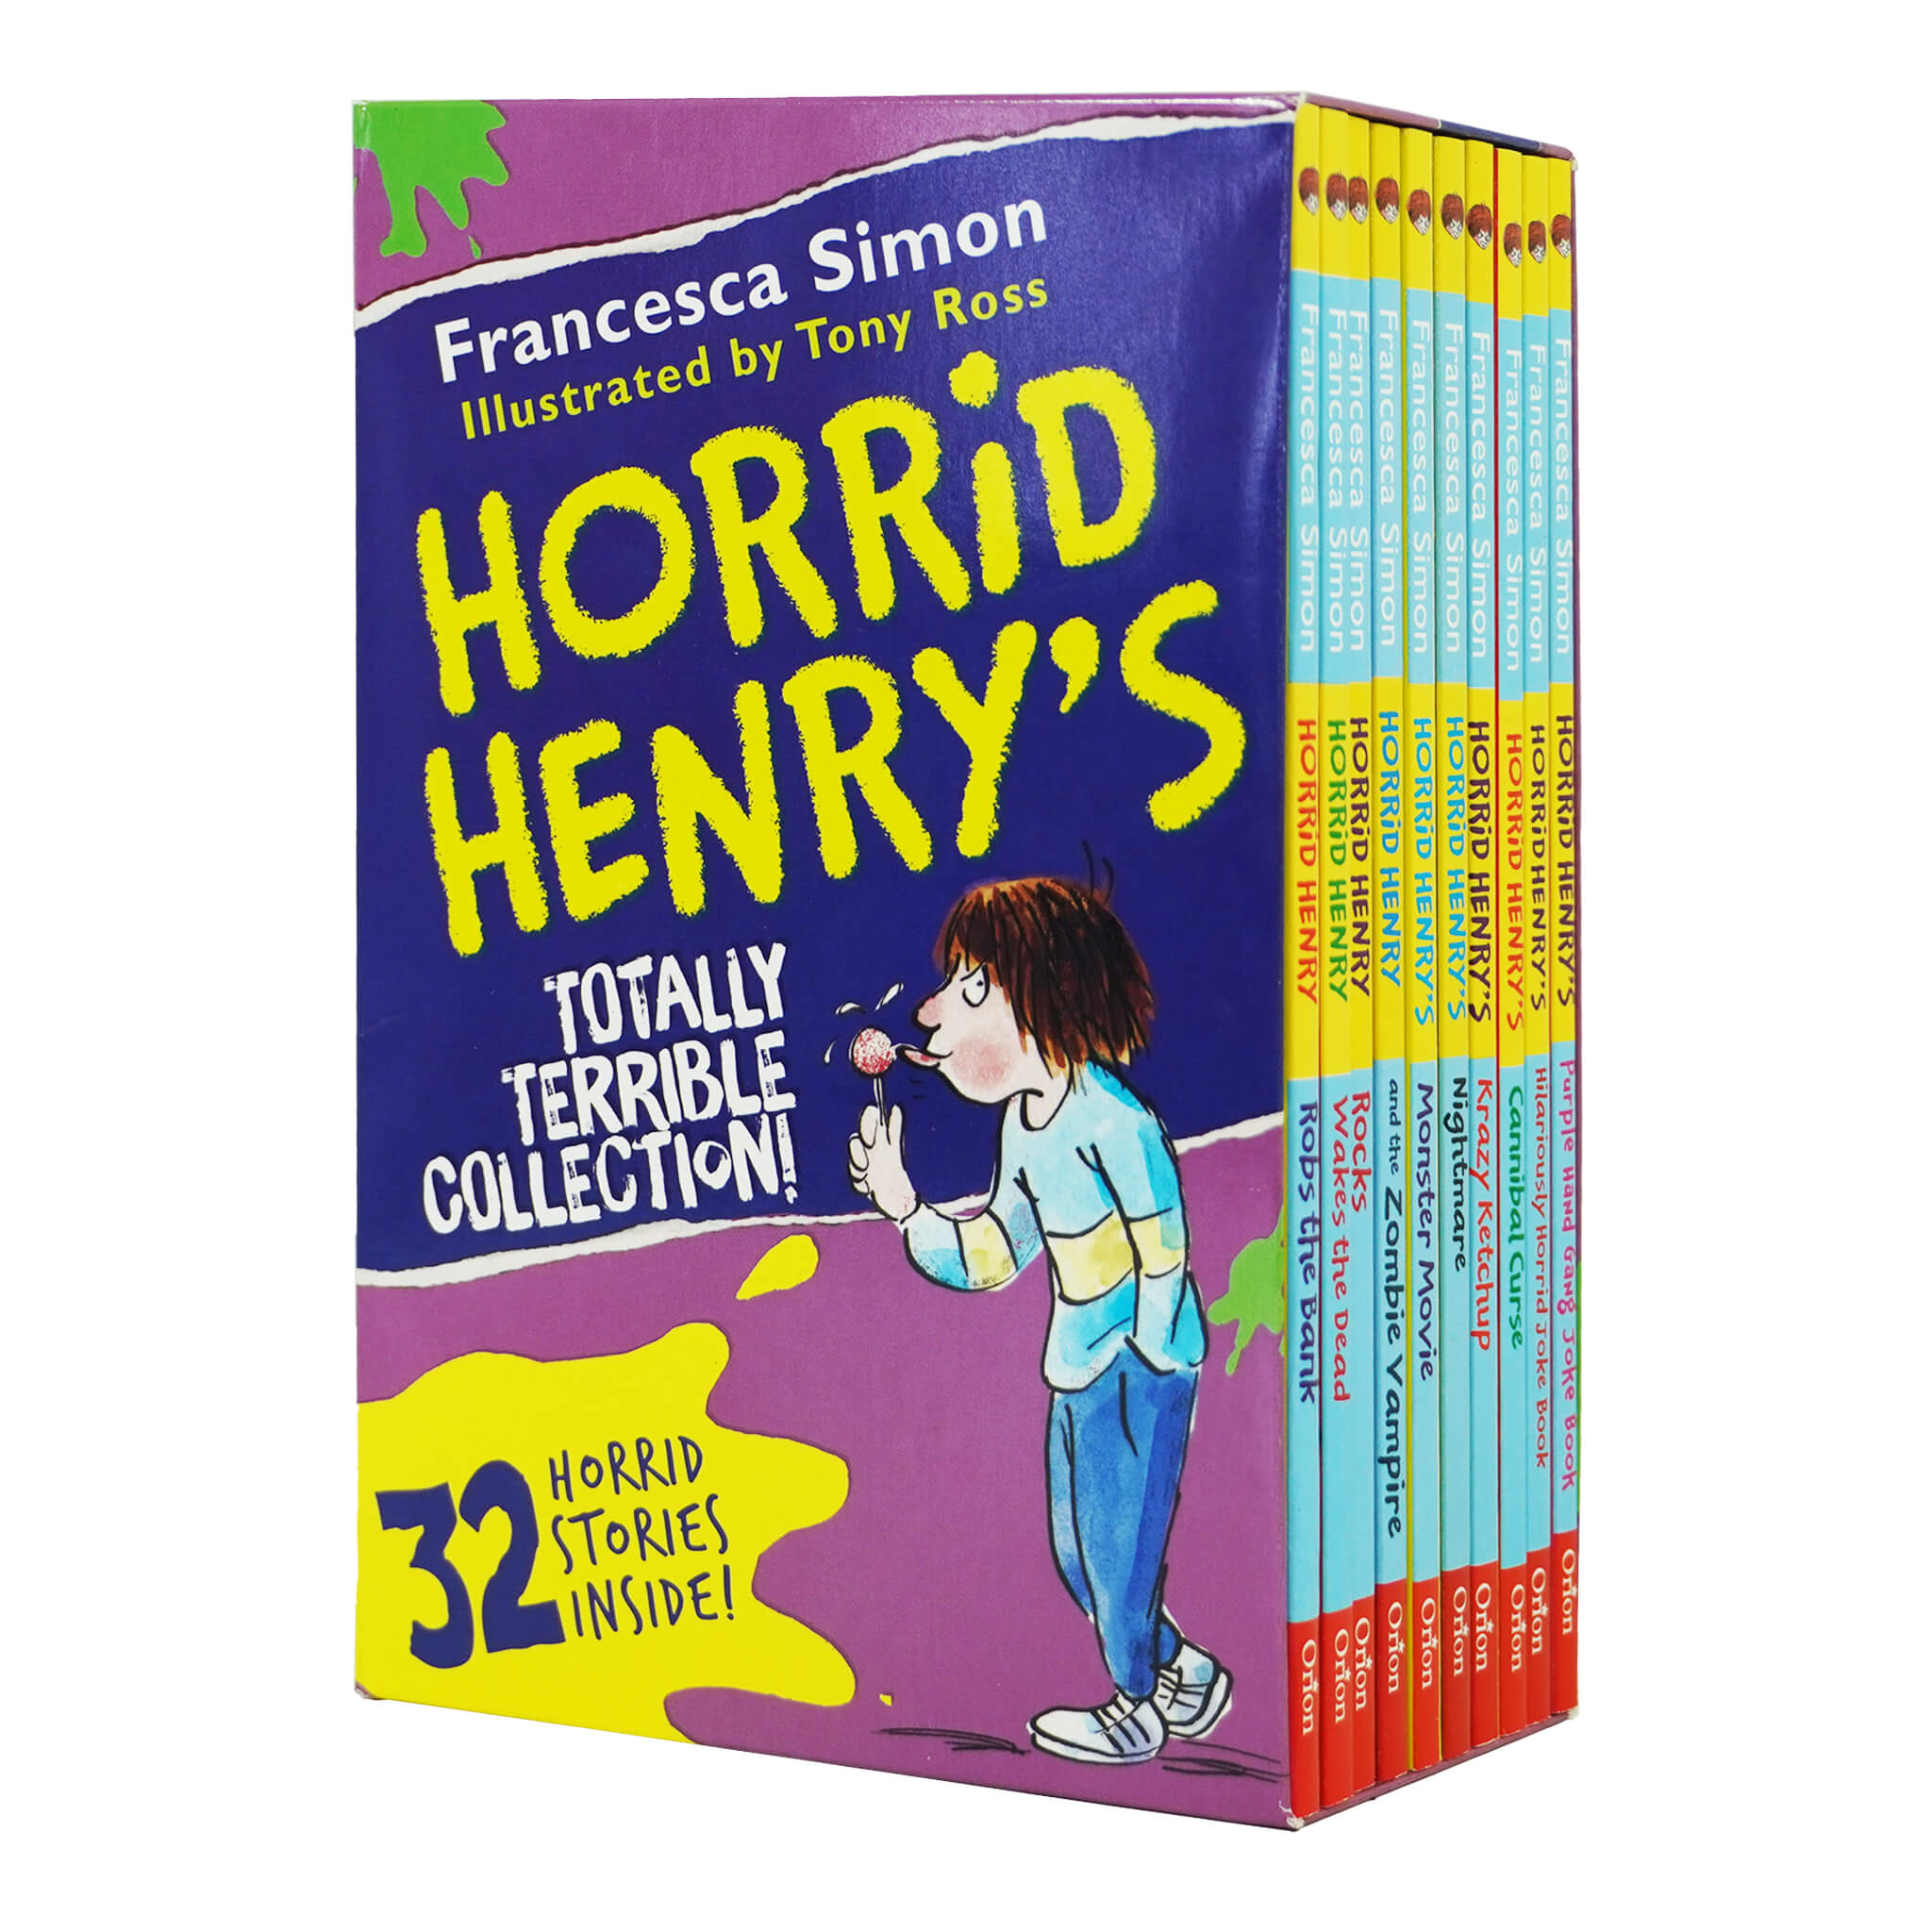 Horrid Henrys Totally Terrible Collection Box Set (Paperback 10권)